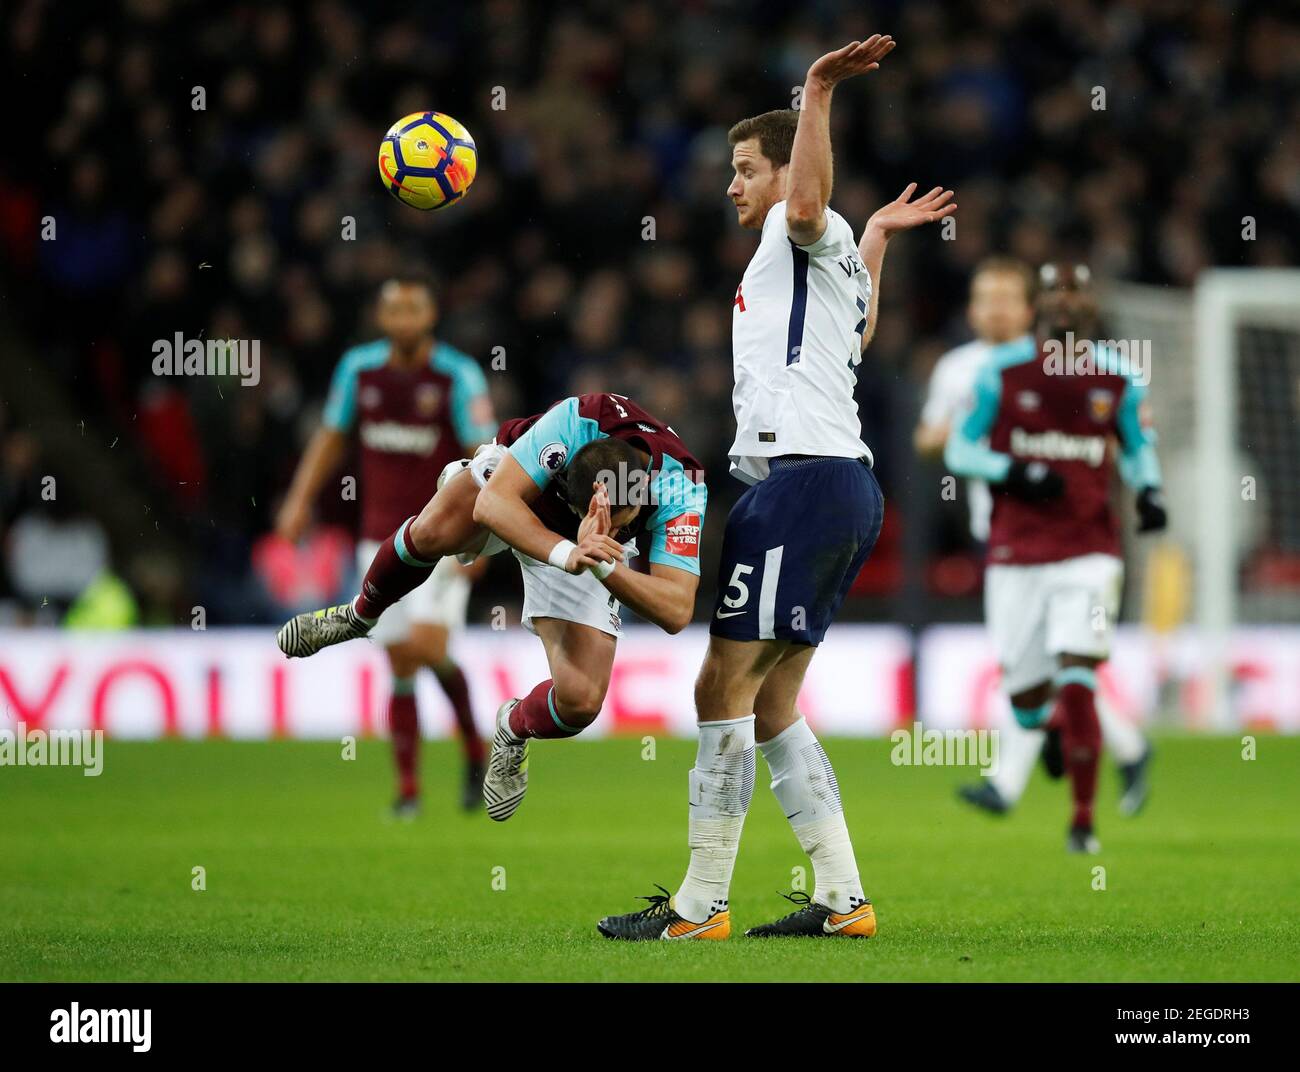 Soccer Football - Premier League - Tottenham Hotspur vs West Ham United - Wembley Stadium, London, Britain - January 4, 2018   West Ham United's Javier Hernandez in action with Tottenham's Jan Vertonghen    REUTERS/Eddie Keogh    EDITORIAL USE ONLY. No use with unauthorized audio, video, data, fixture lists, club/league logos or 'live' services. Online in-match use limited to 75 images, no video emulation. No use in betting, games or single club/league/player publications.  Please contact your account representative for further details. Stock Photo